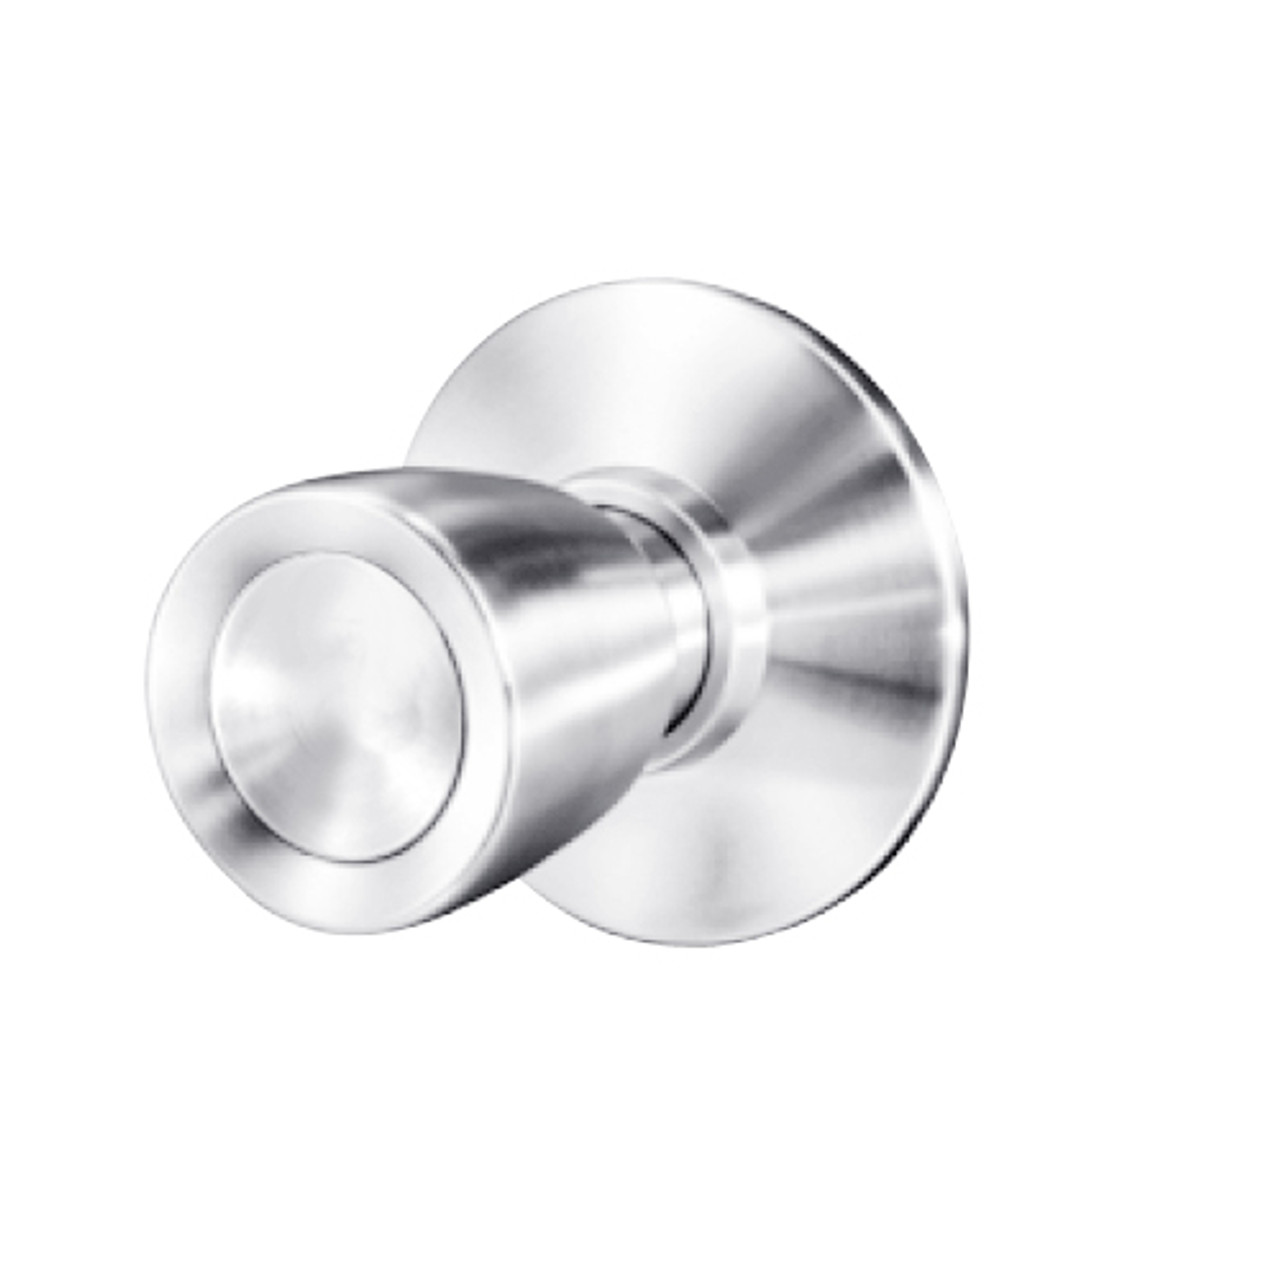 8K30Y6DSTK625 Best 8K Series Exit Heavy Duty Cylindrical Knob Locks with Tulip Style in Bright Chrome